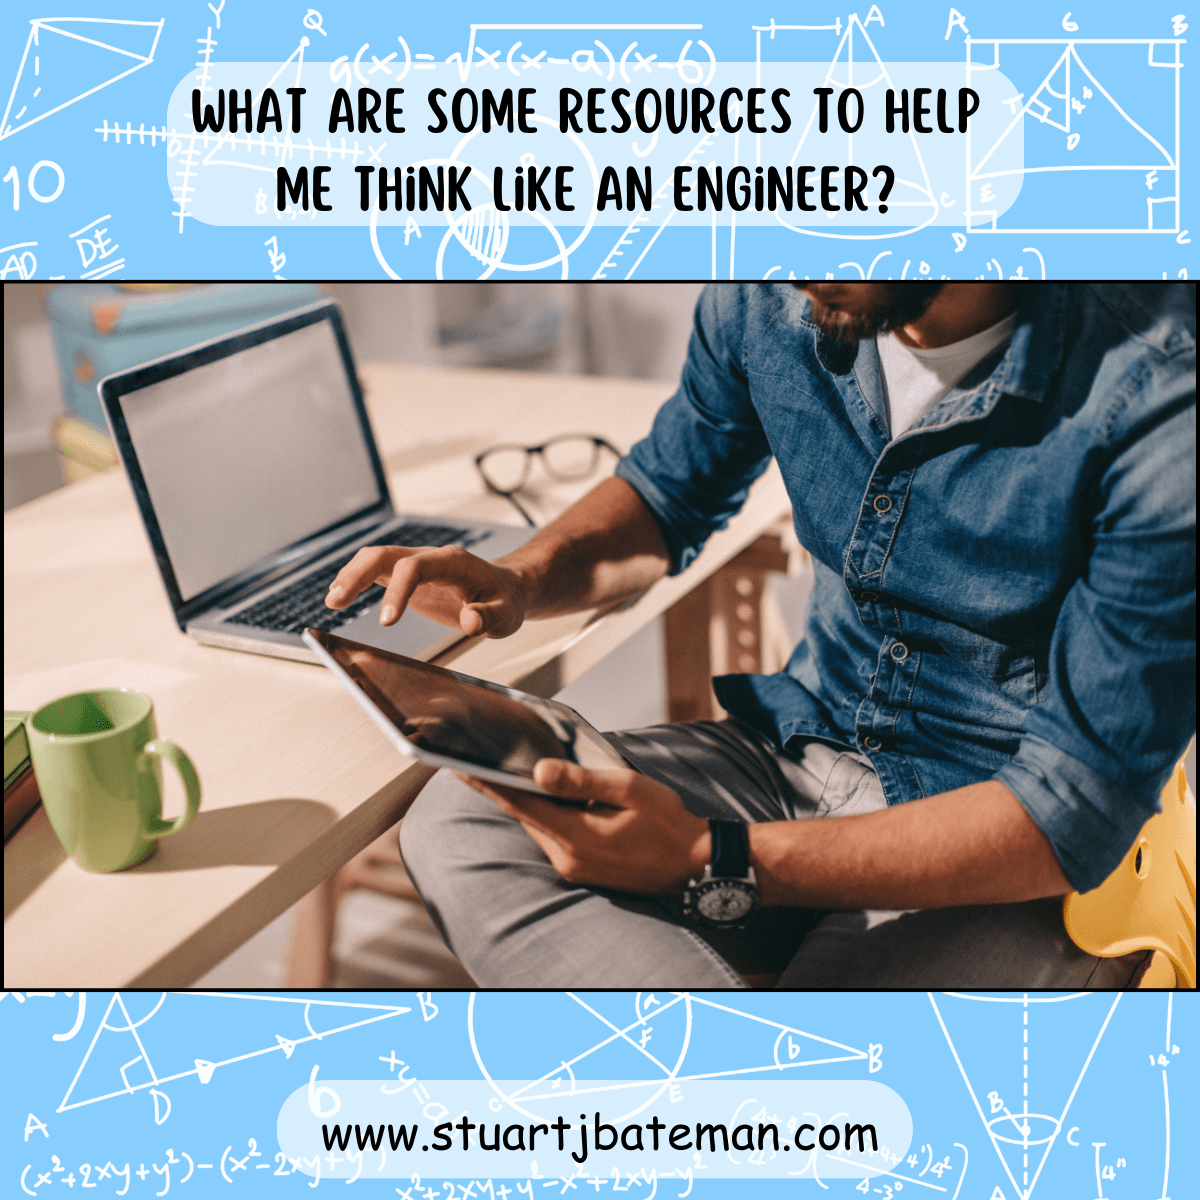 Online resources to help think like an engineer